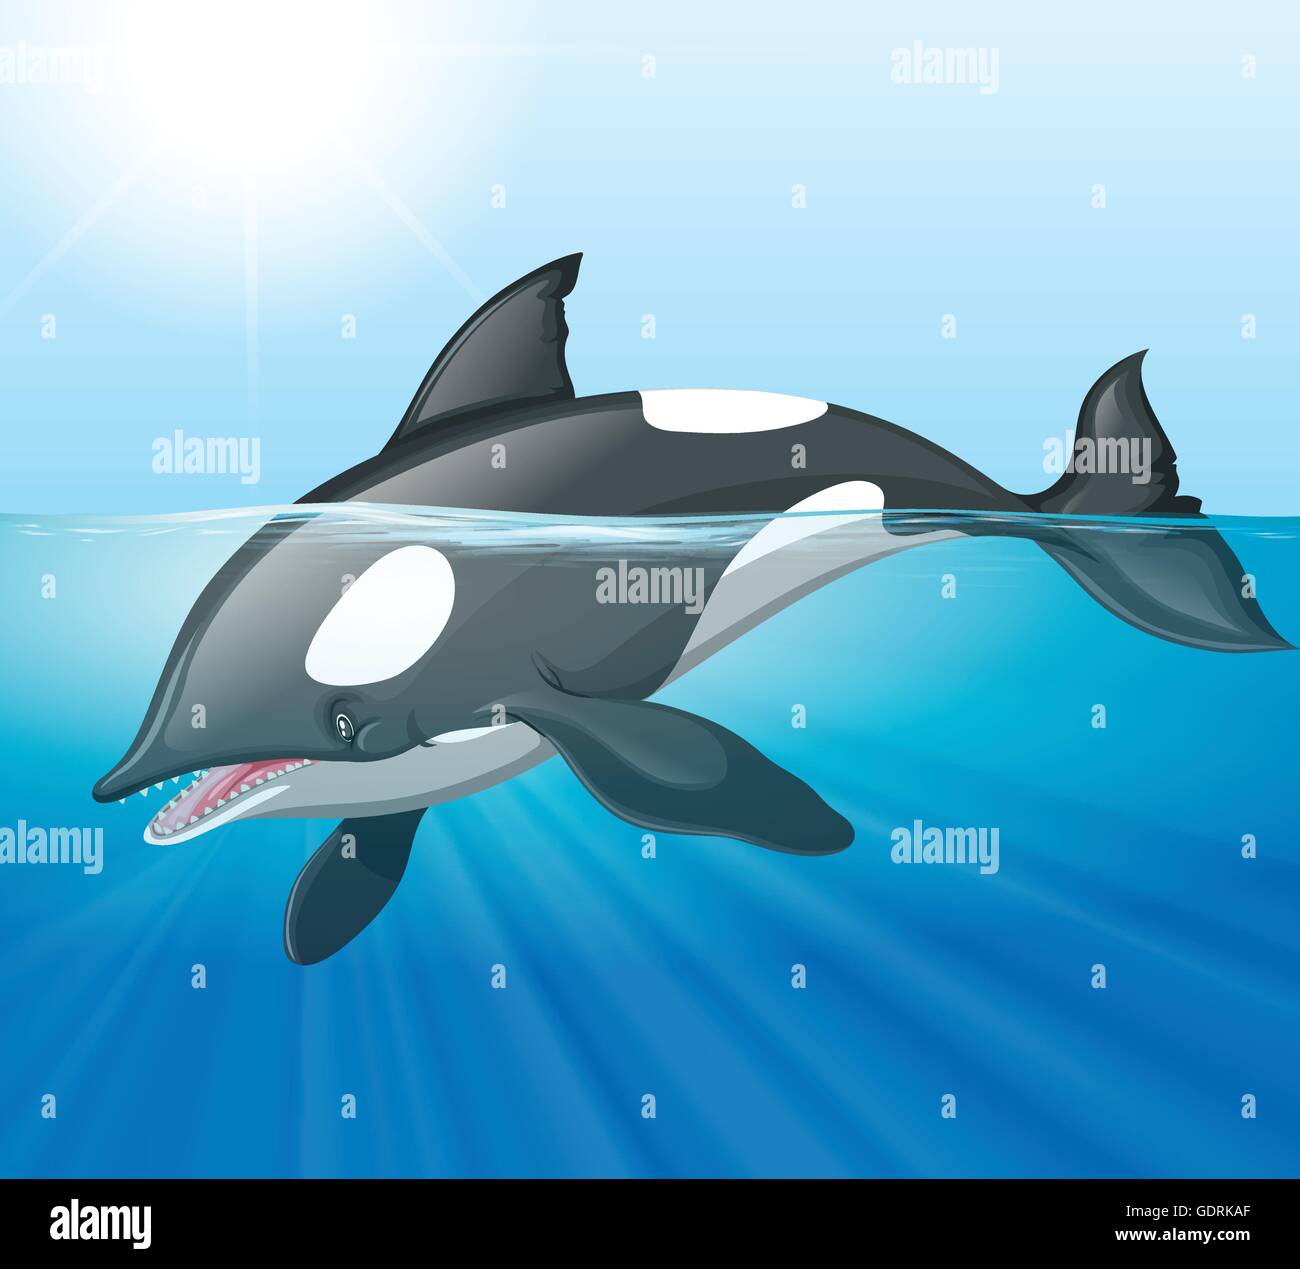 Orca Drawing Stock Photos & Orca Drawing Stock Images - Alamy